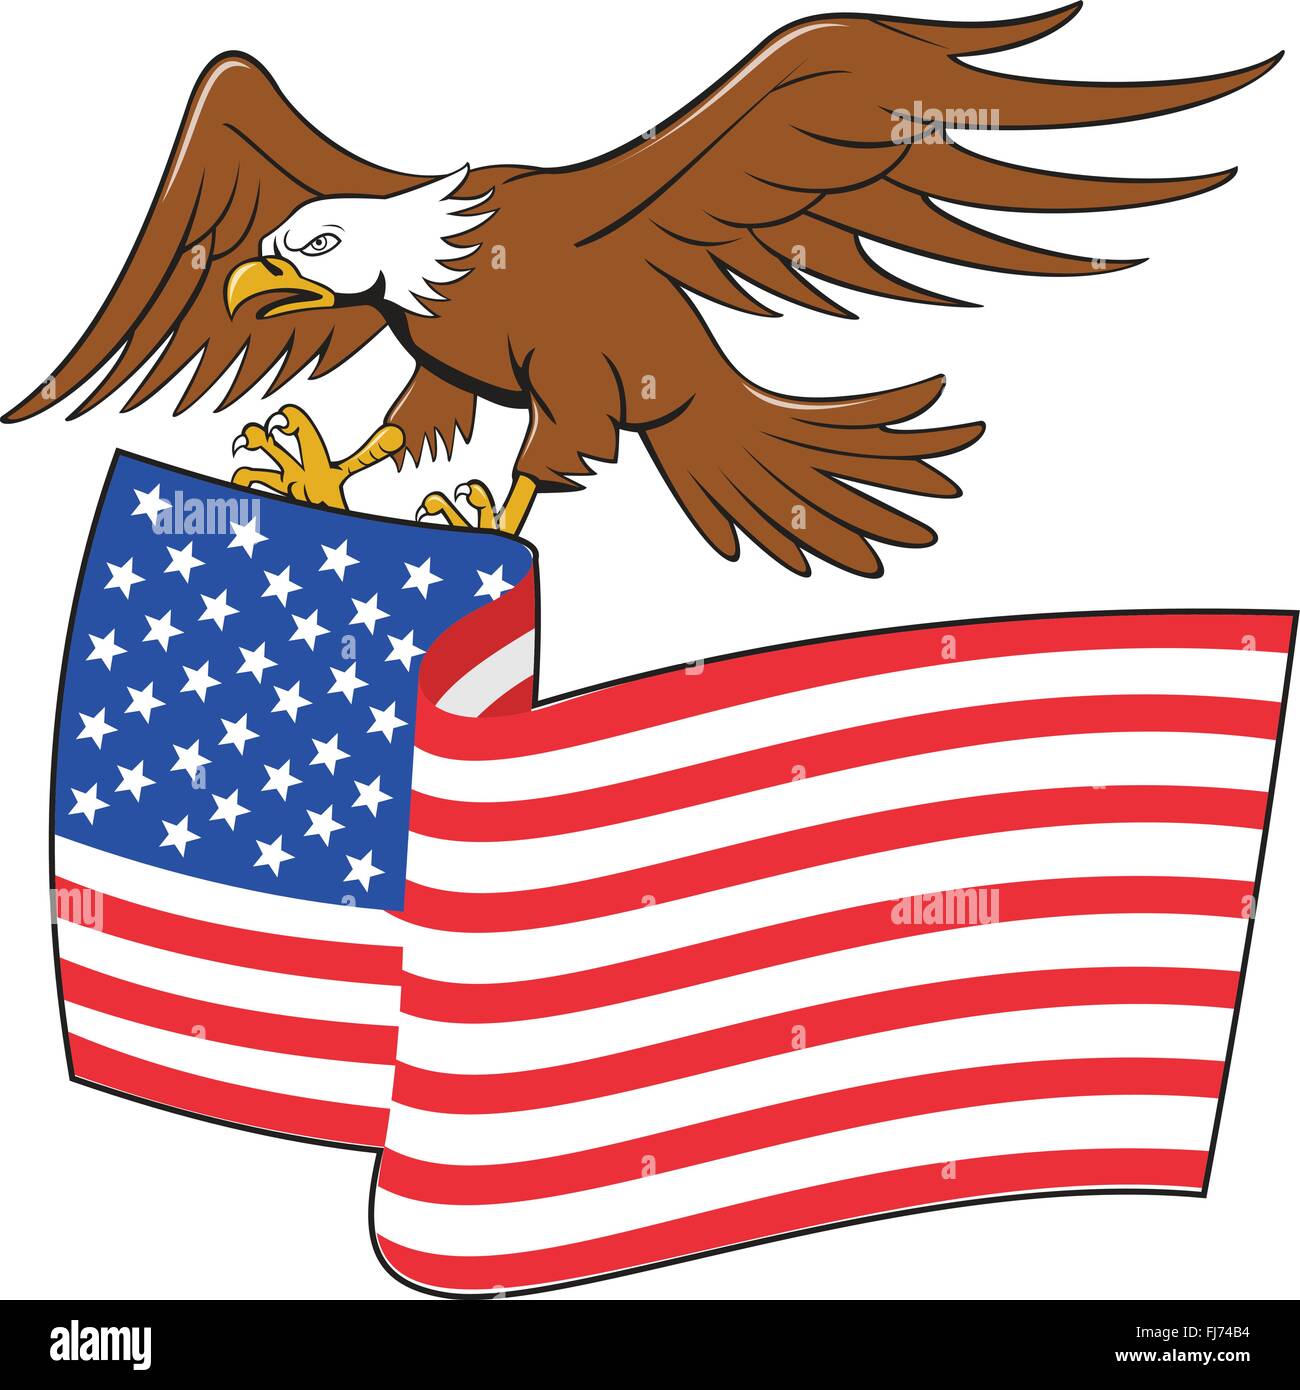 Illustration of an american bald eagle carrying usa stars and stripes flag viewed from the side set on isolated white background done in cartoon style. Stock Vector